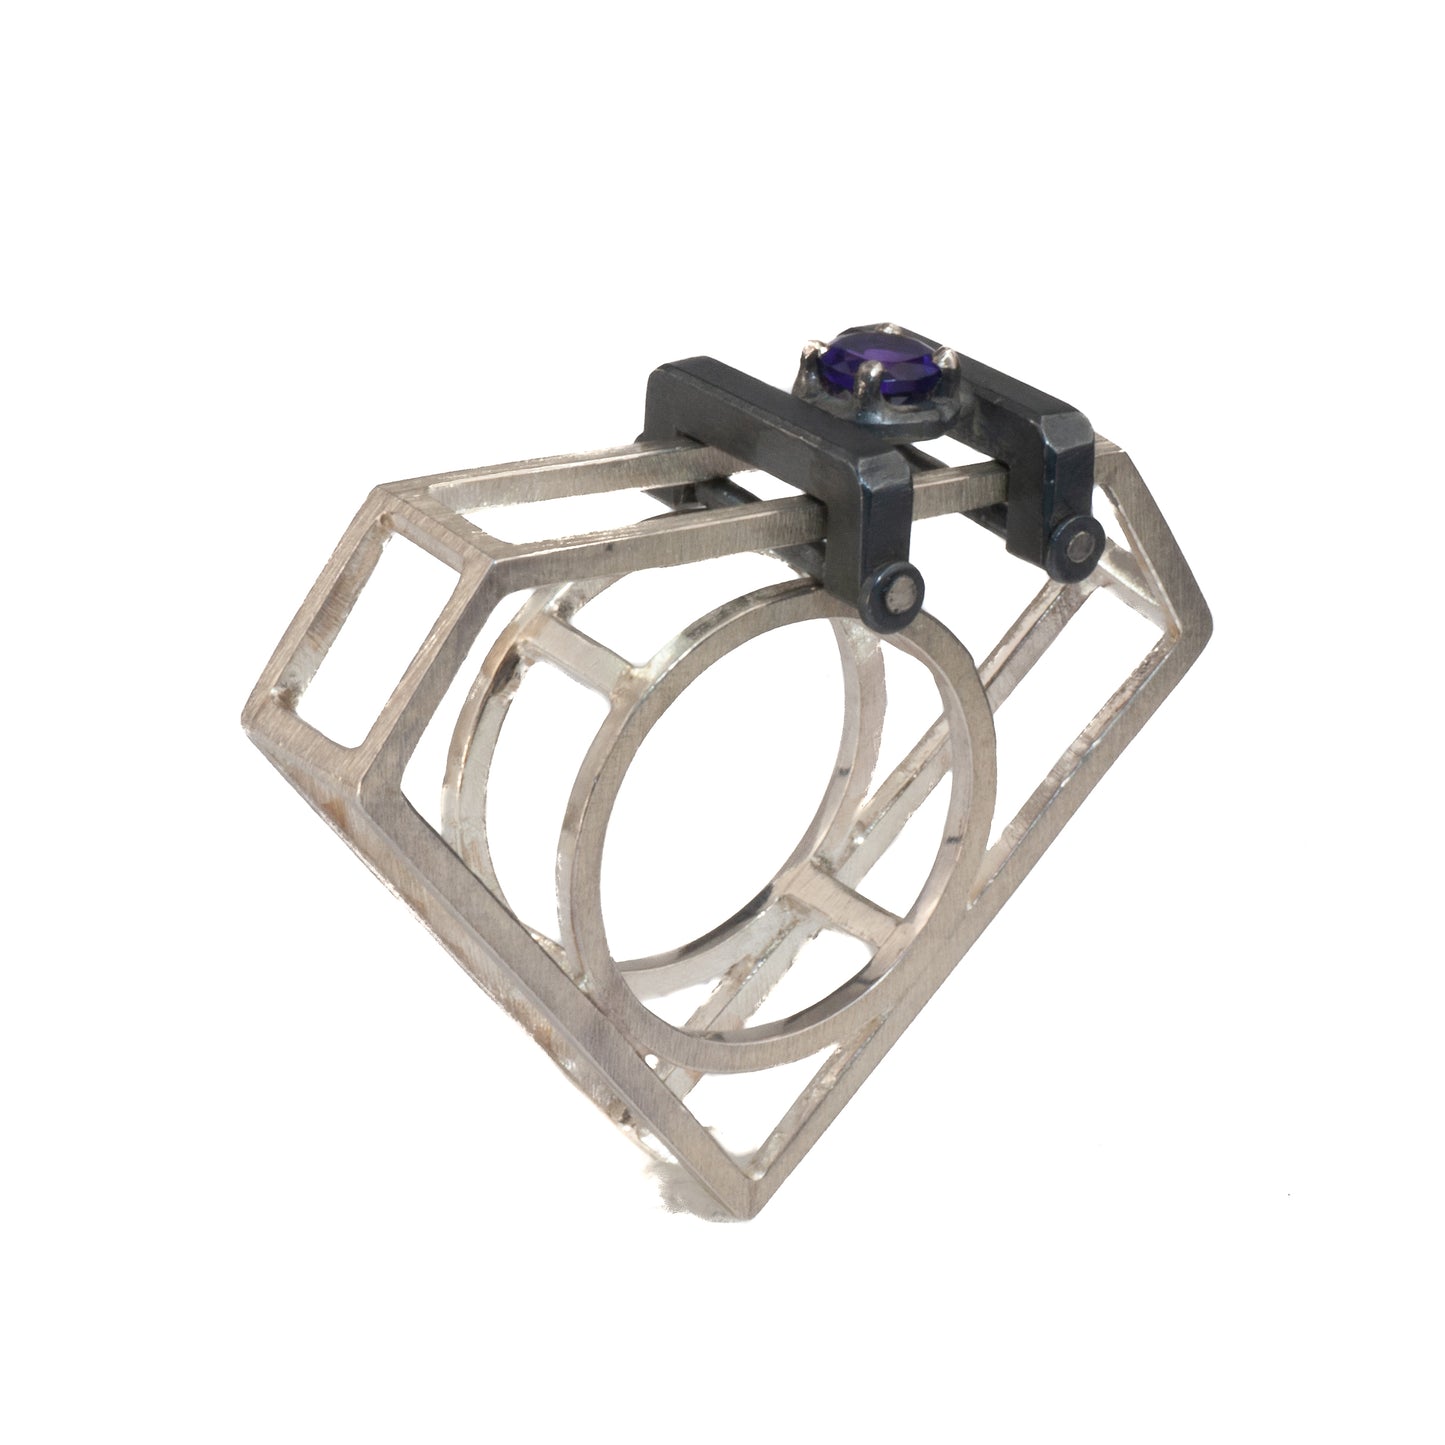 Mysterium Collection "Diamond" Ring with Amethyst